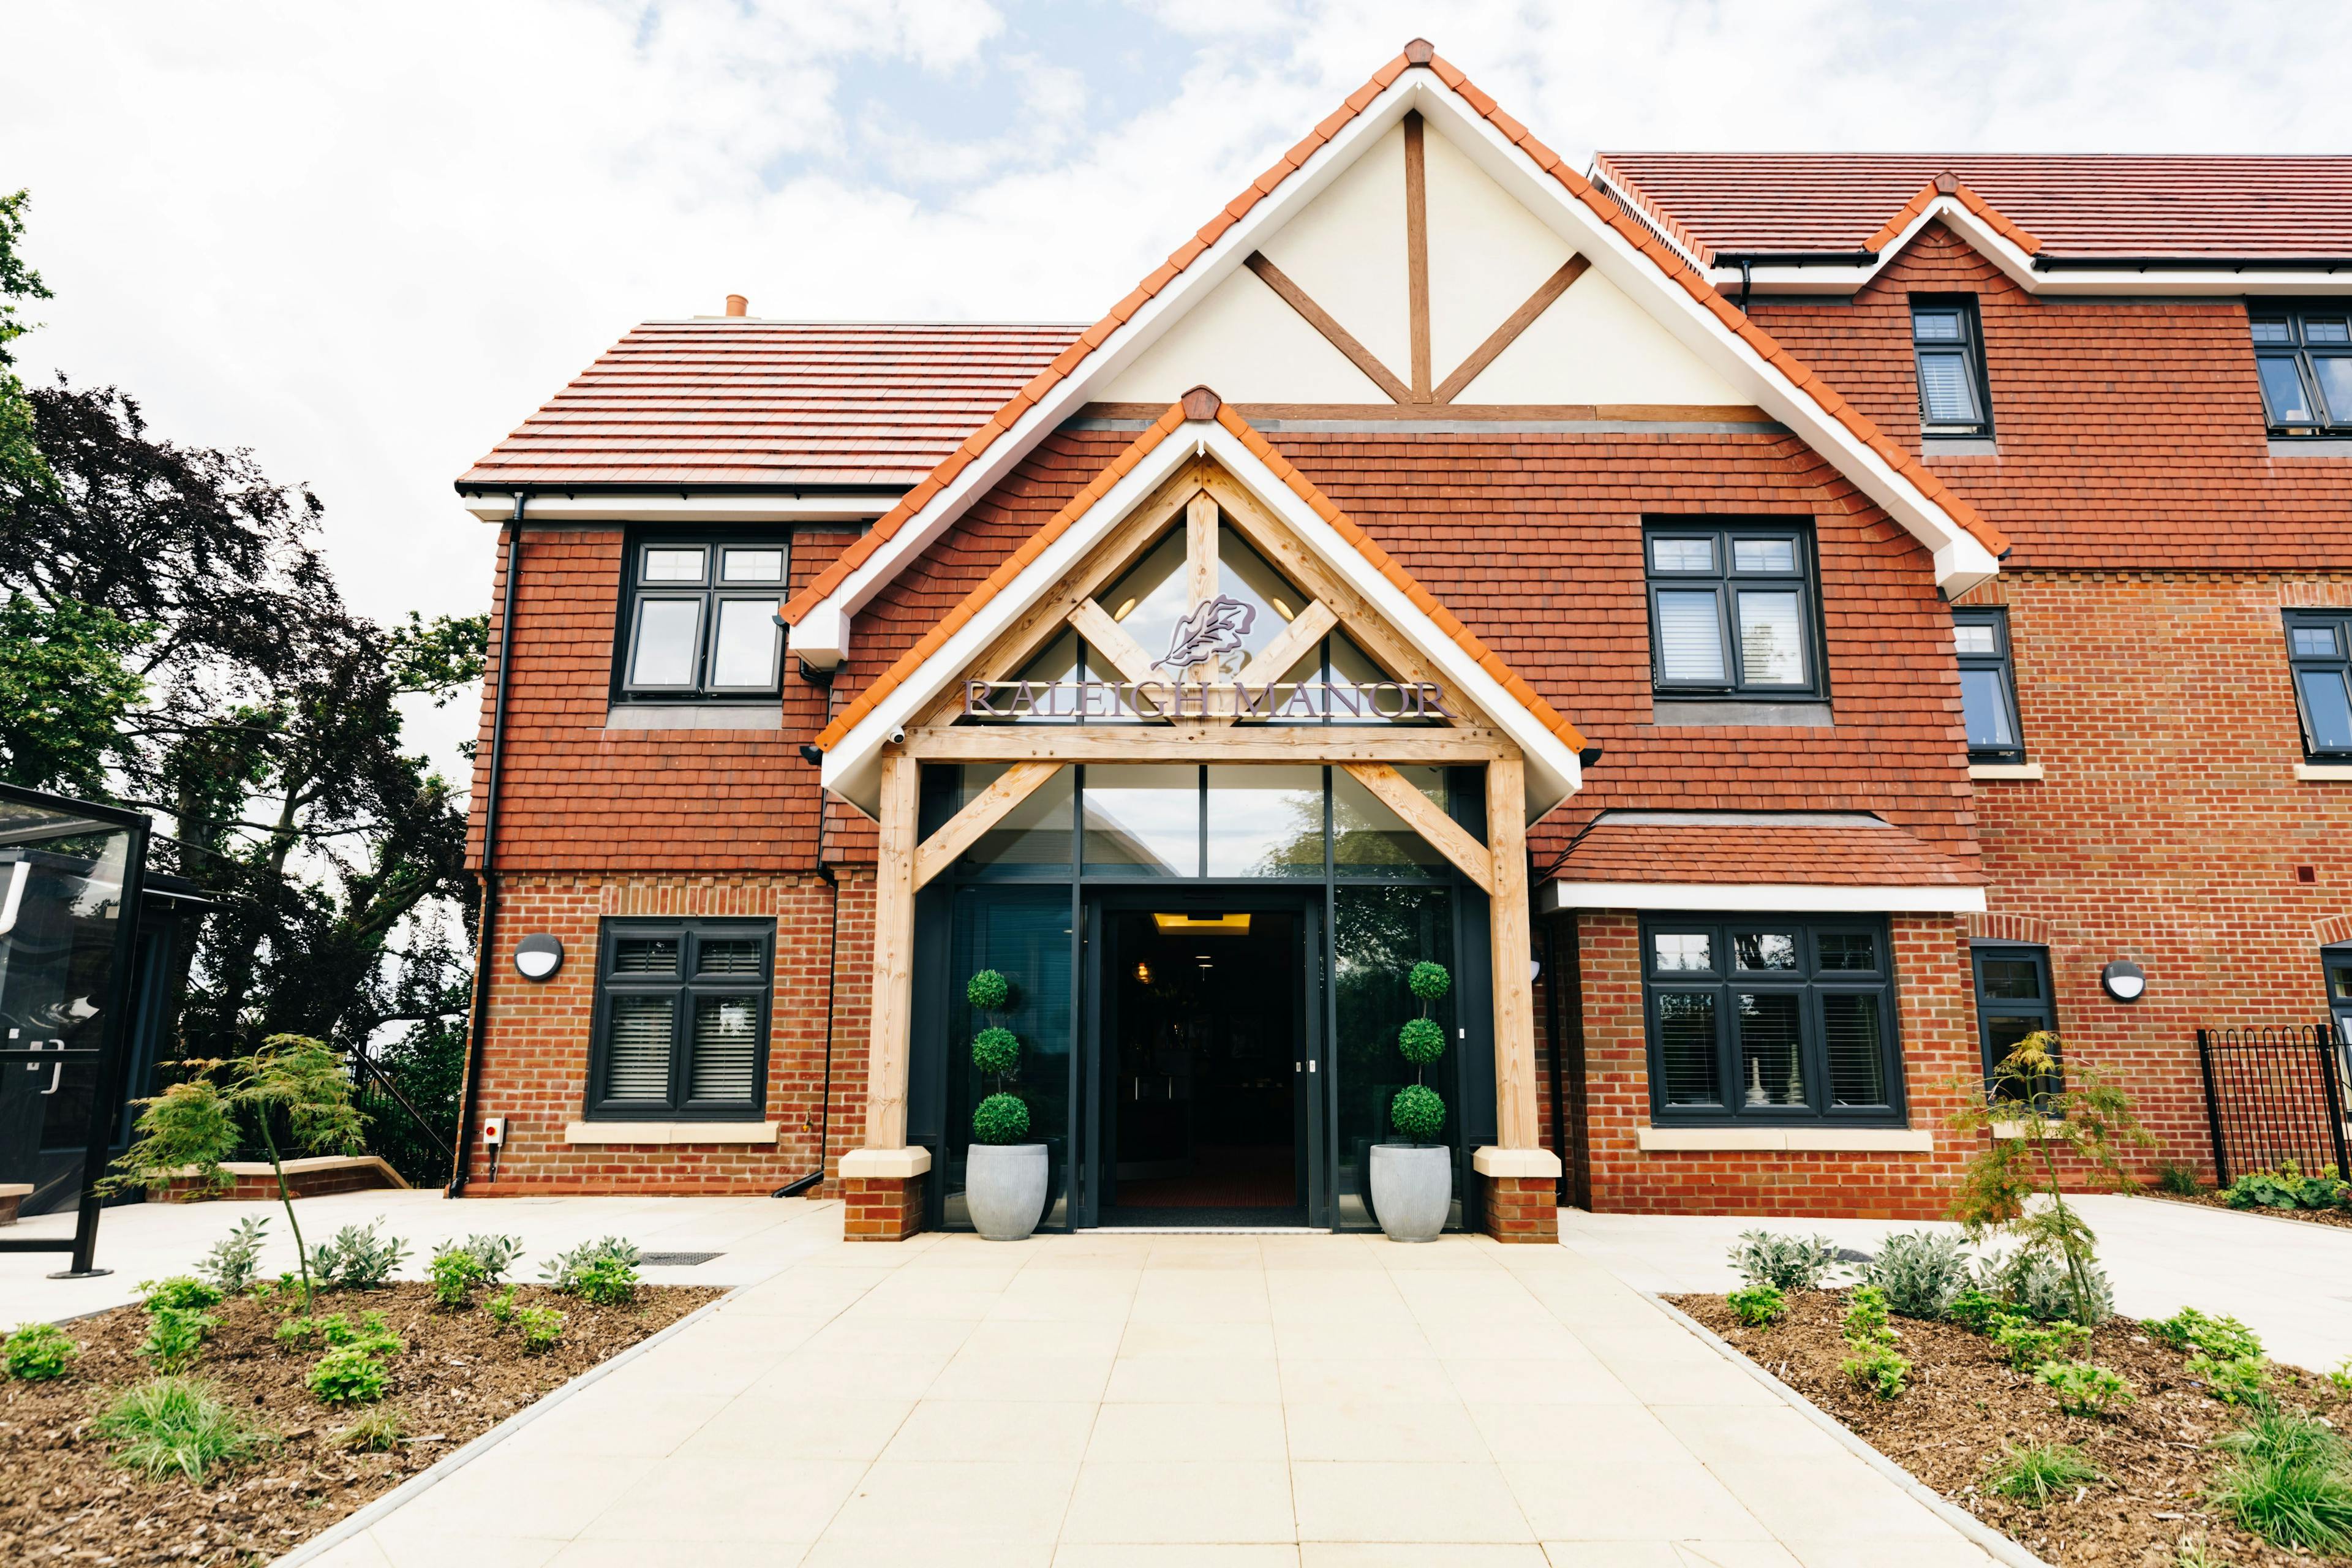 Exterior of Raleigh Care Home in Exmouth, Devon